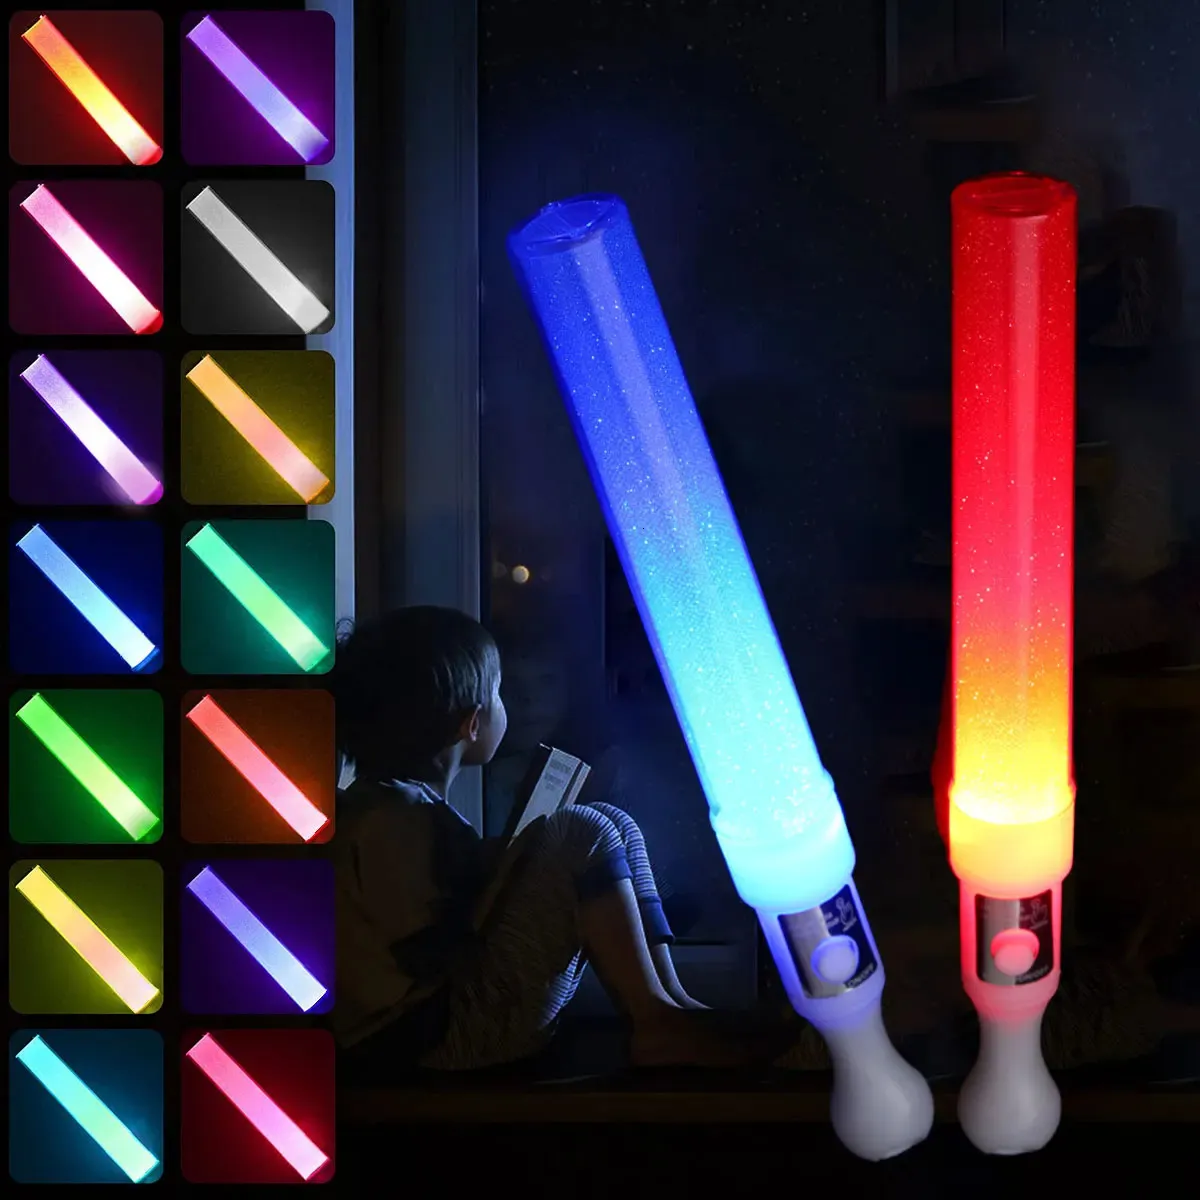 LED luminous rod RGB LED cheerleading rod lighting cheerleading tube color flashing luminous rod swimming pool party supplies gifts 240124